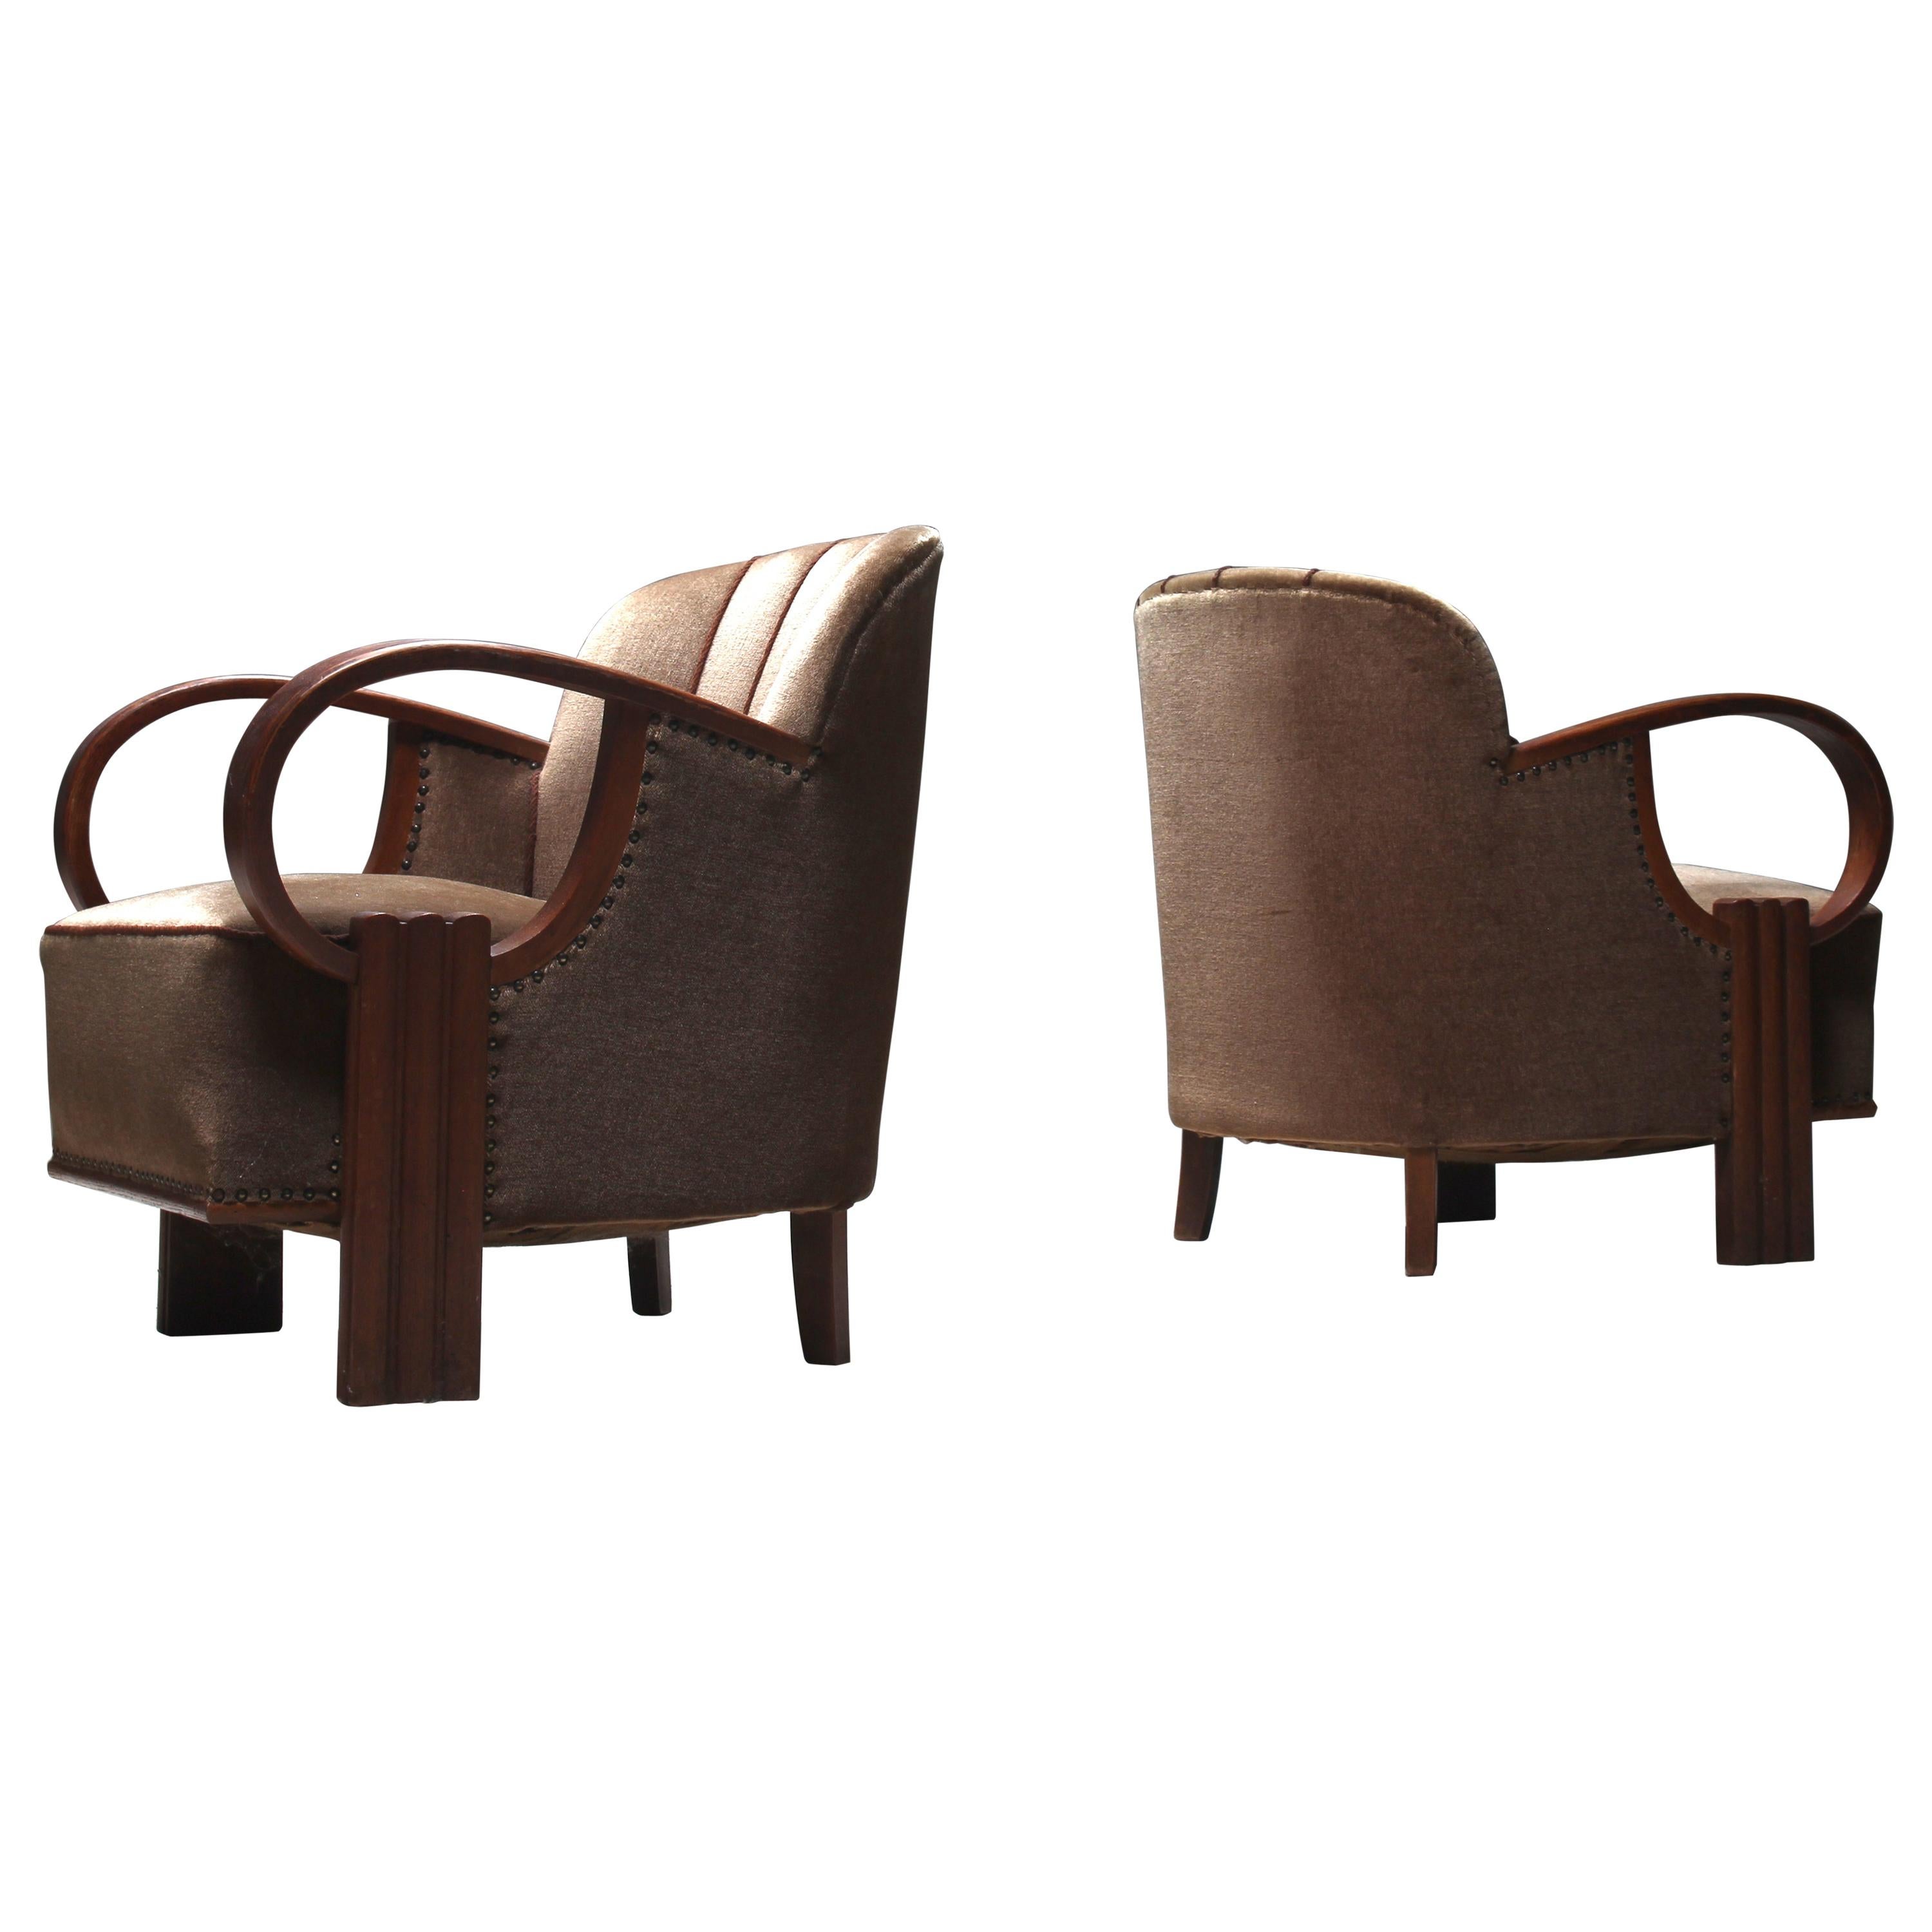 Pair of French Jean Pascaud Style Art Deco Club Chairs in Oak and Velvet, 1930s For Sale